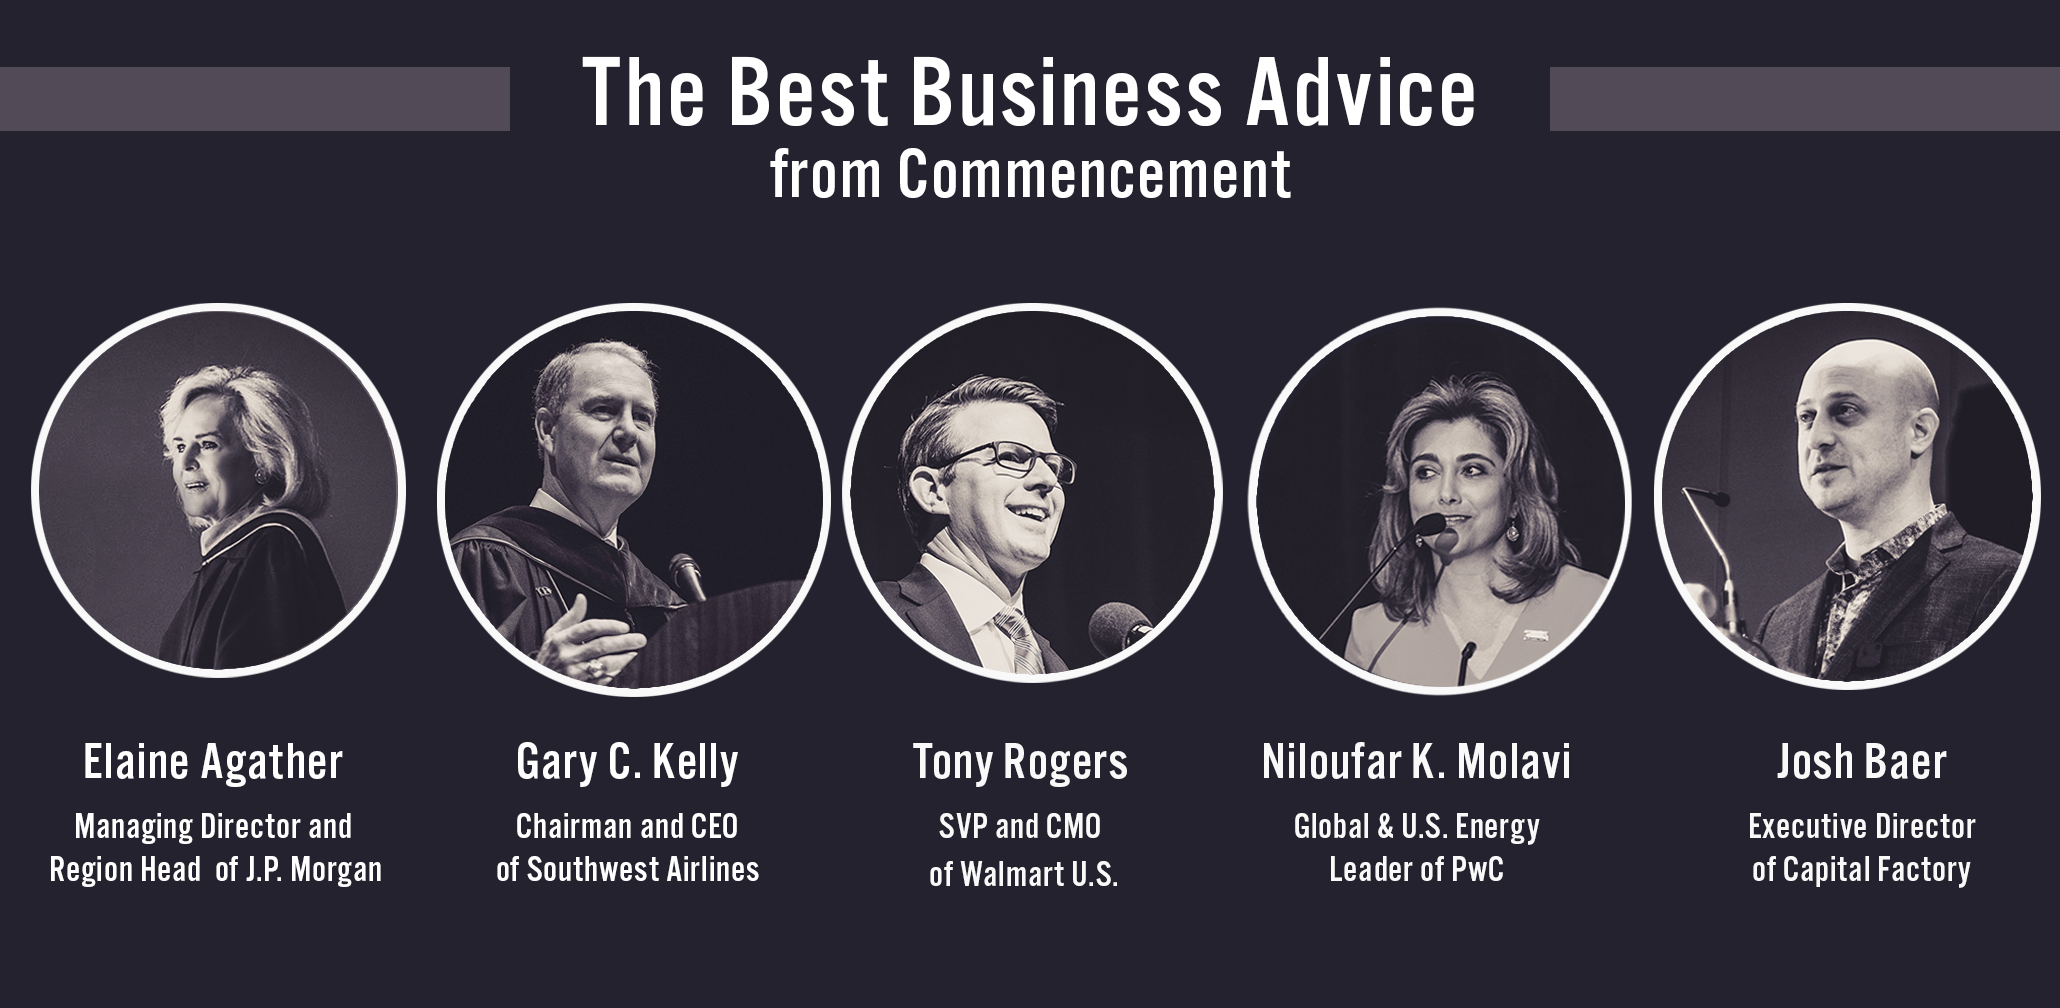 9 Business Tips from Commencement 9 business tips from commencement img 661db1c93be64